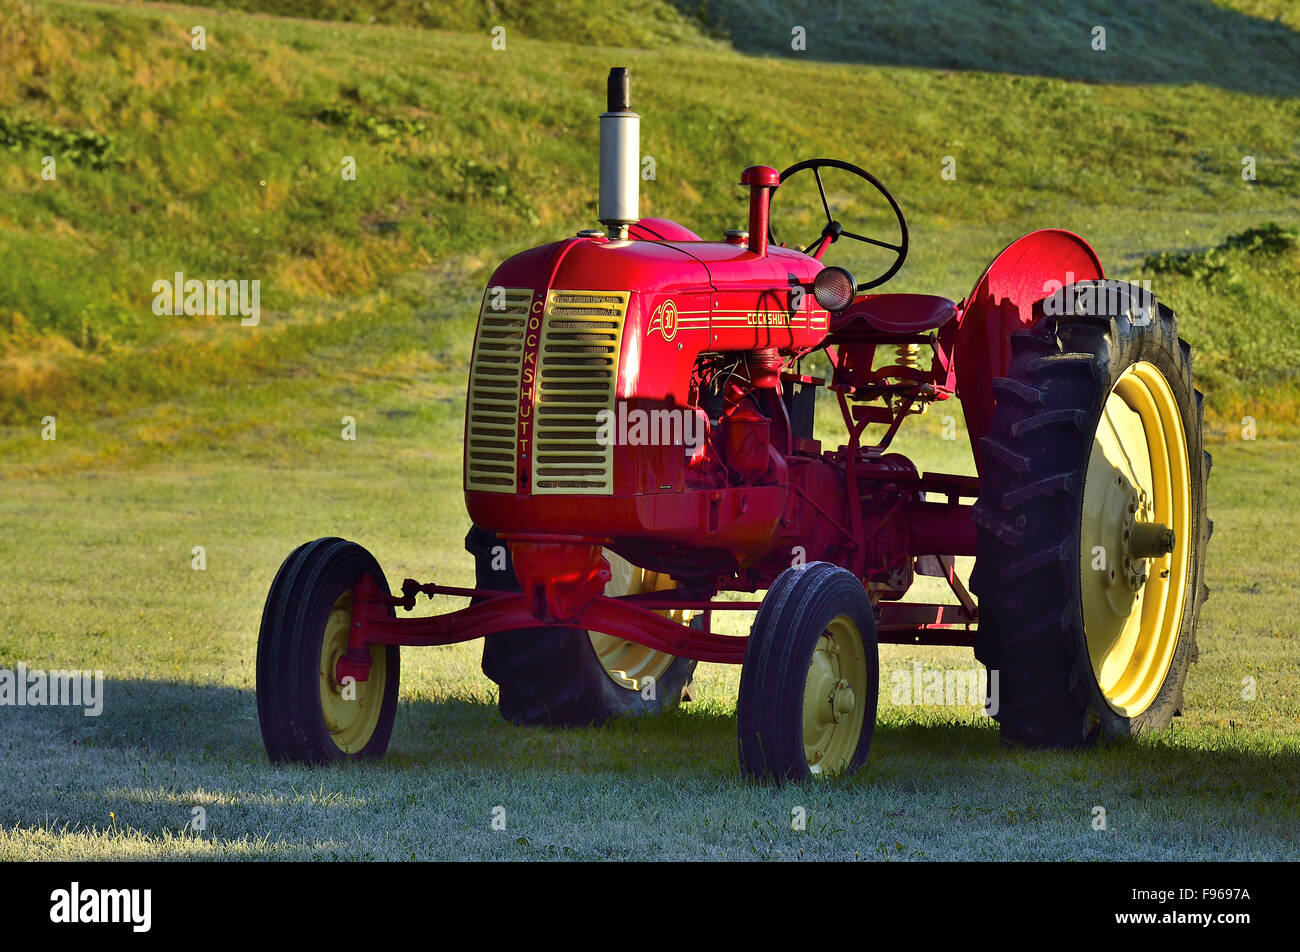 A vintage Cockshutt farm tractor in a rural field bathed by the warming early morning light near Sussex New Brunswick Canada Stock Photo